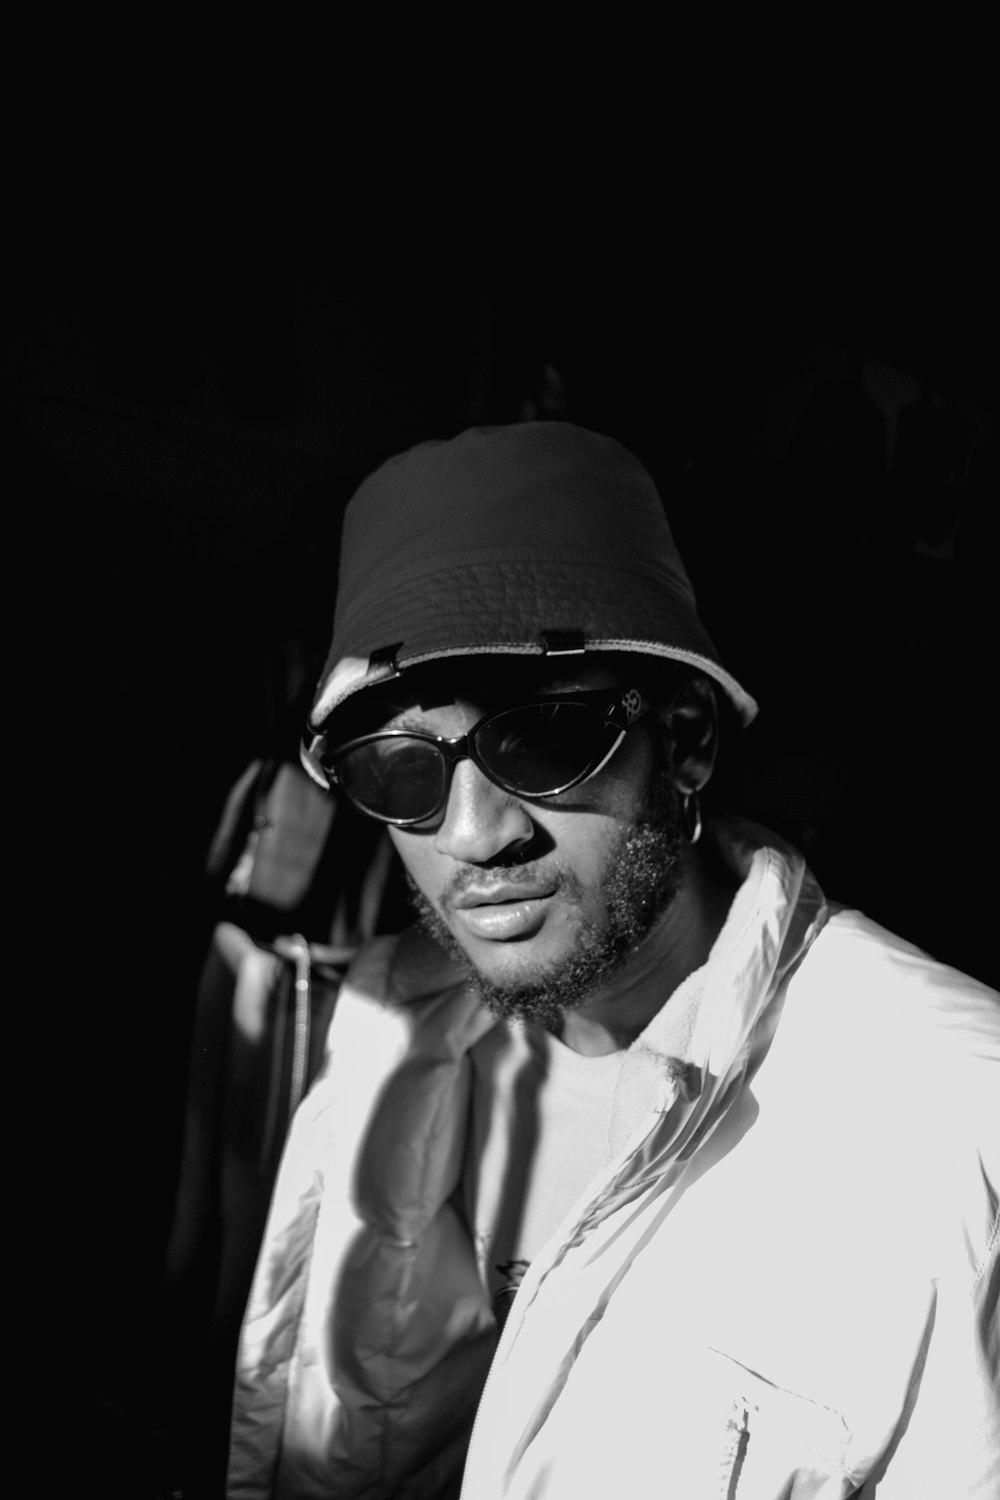 grayscale photo of man wearing bucket hat and jacket